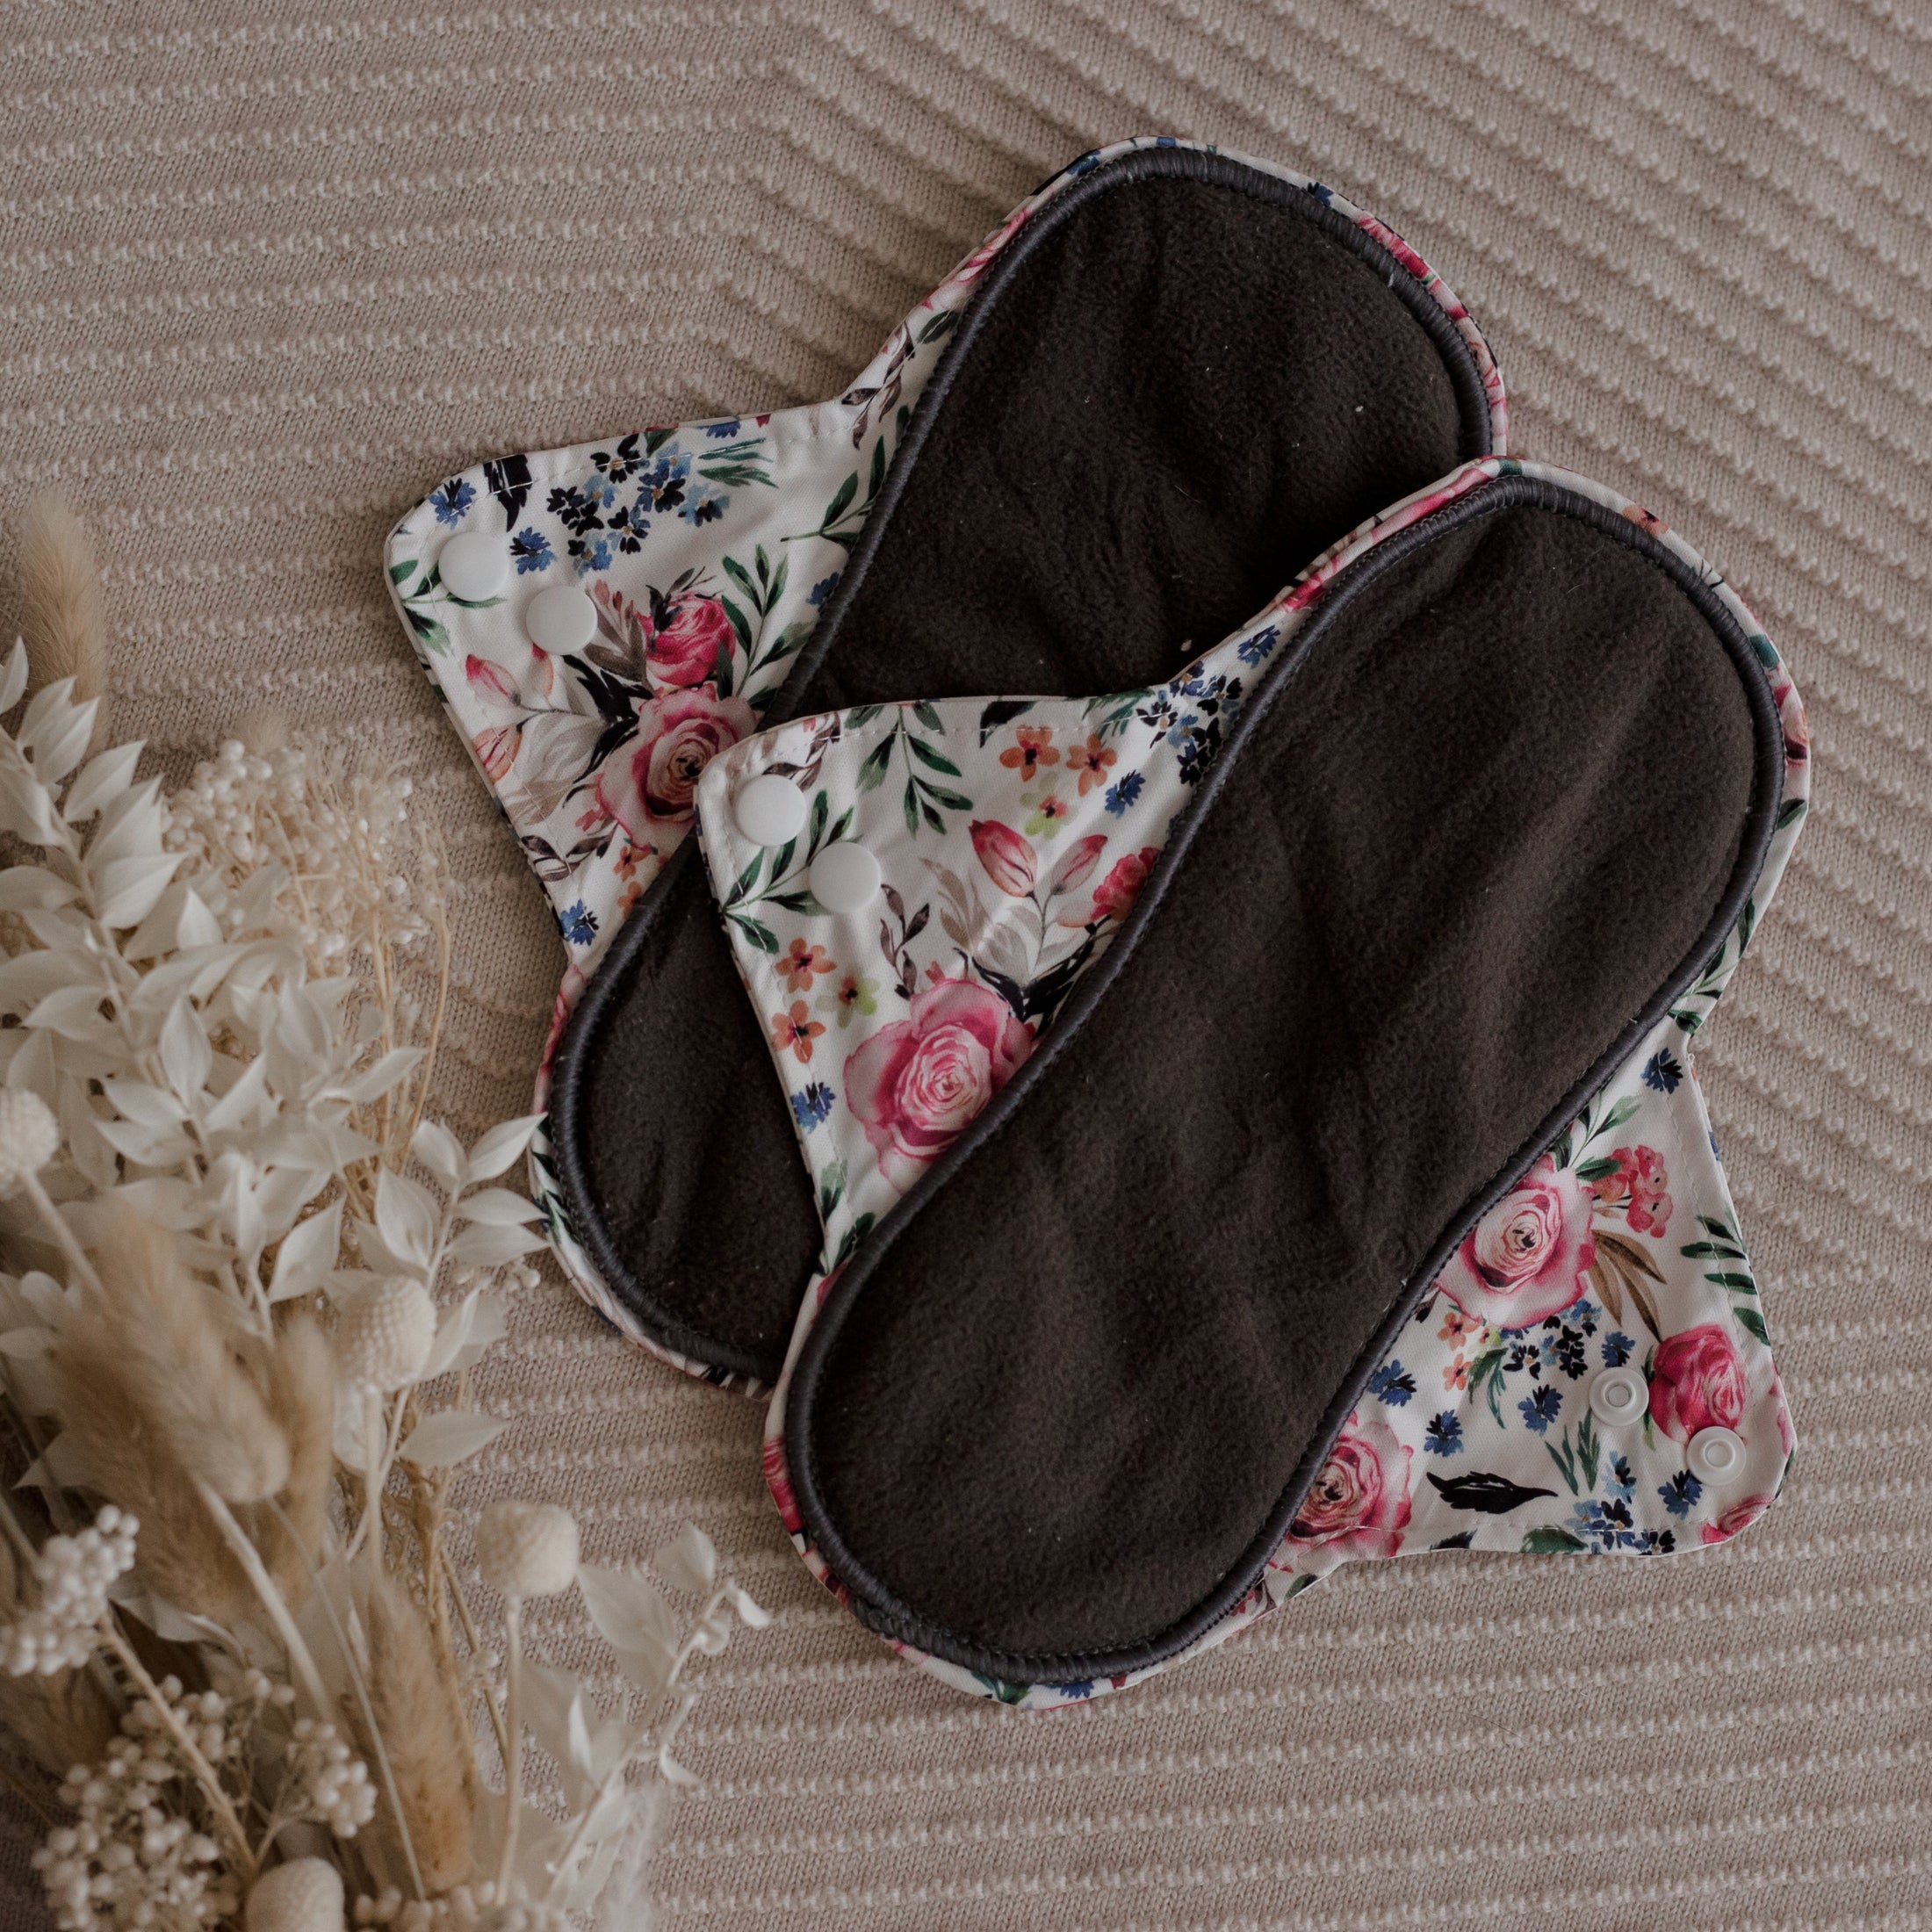 Reusable Cloth Menstrual Pads - 5 Pack with Wet Bag